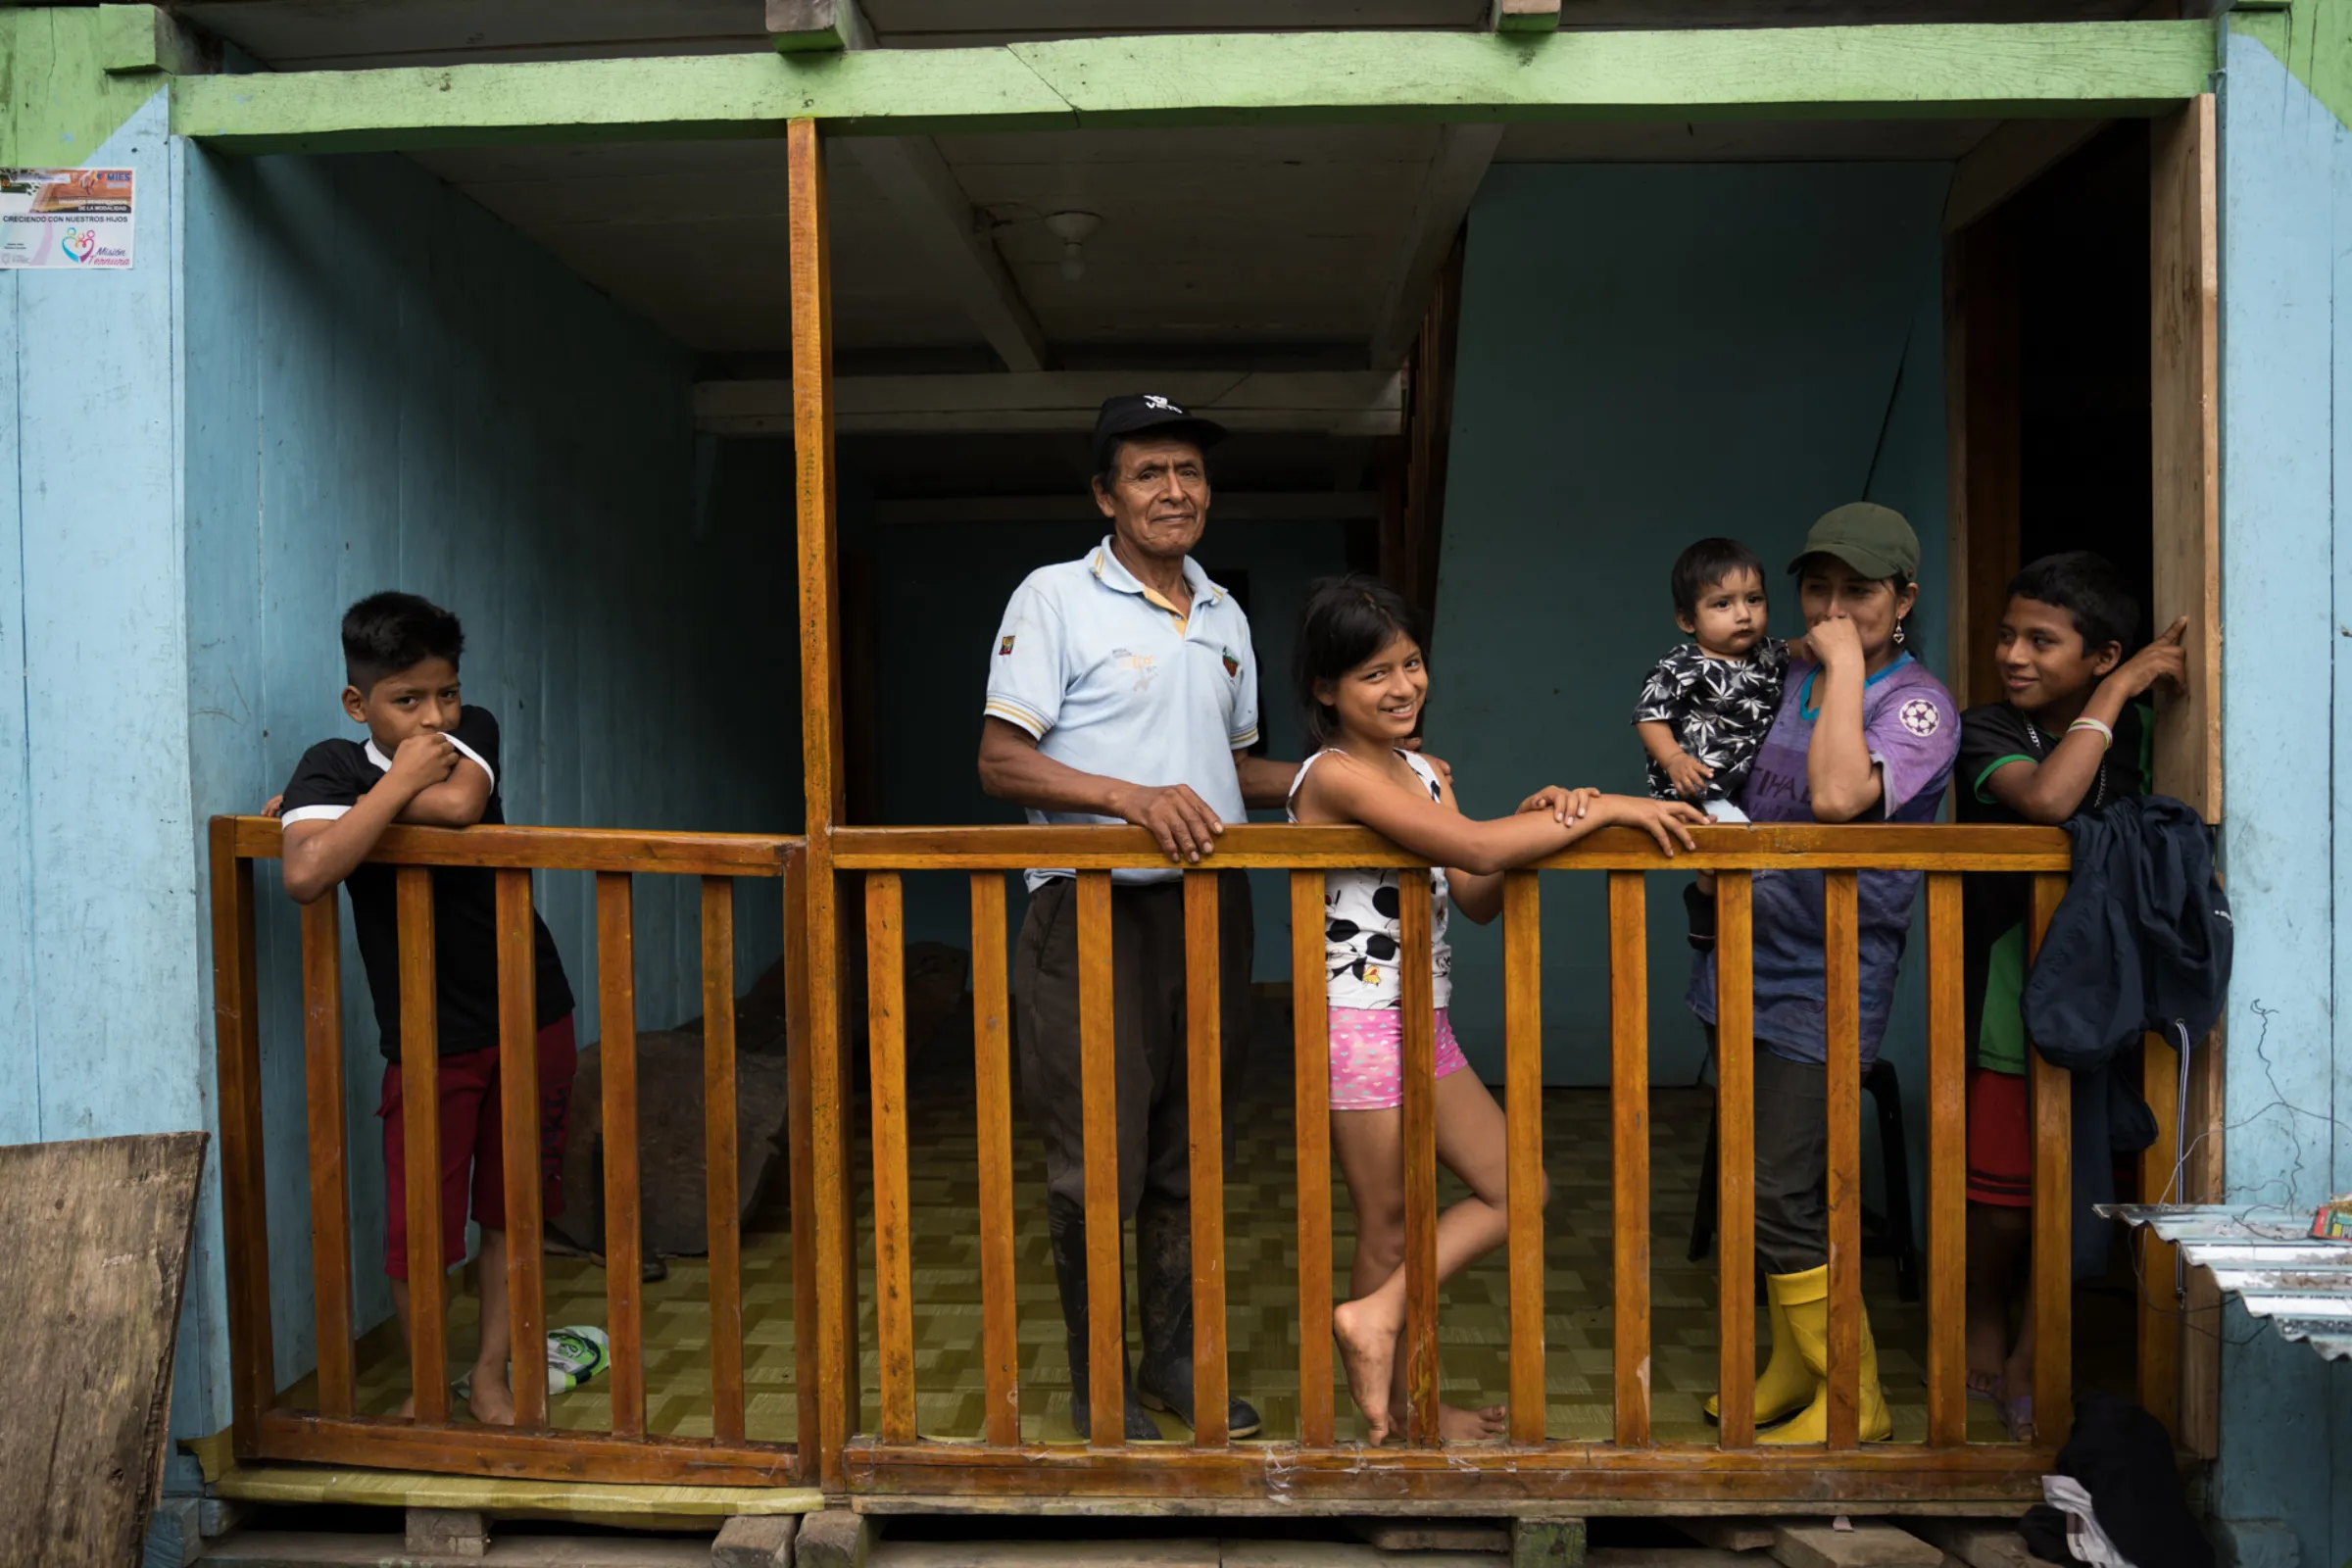 Shuar farmer Carlos Cajamarca stands on his balcony with his daughter, carrying her son, and her three other children